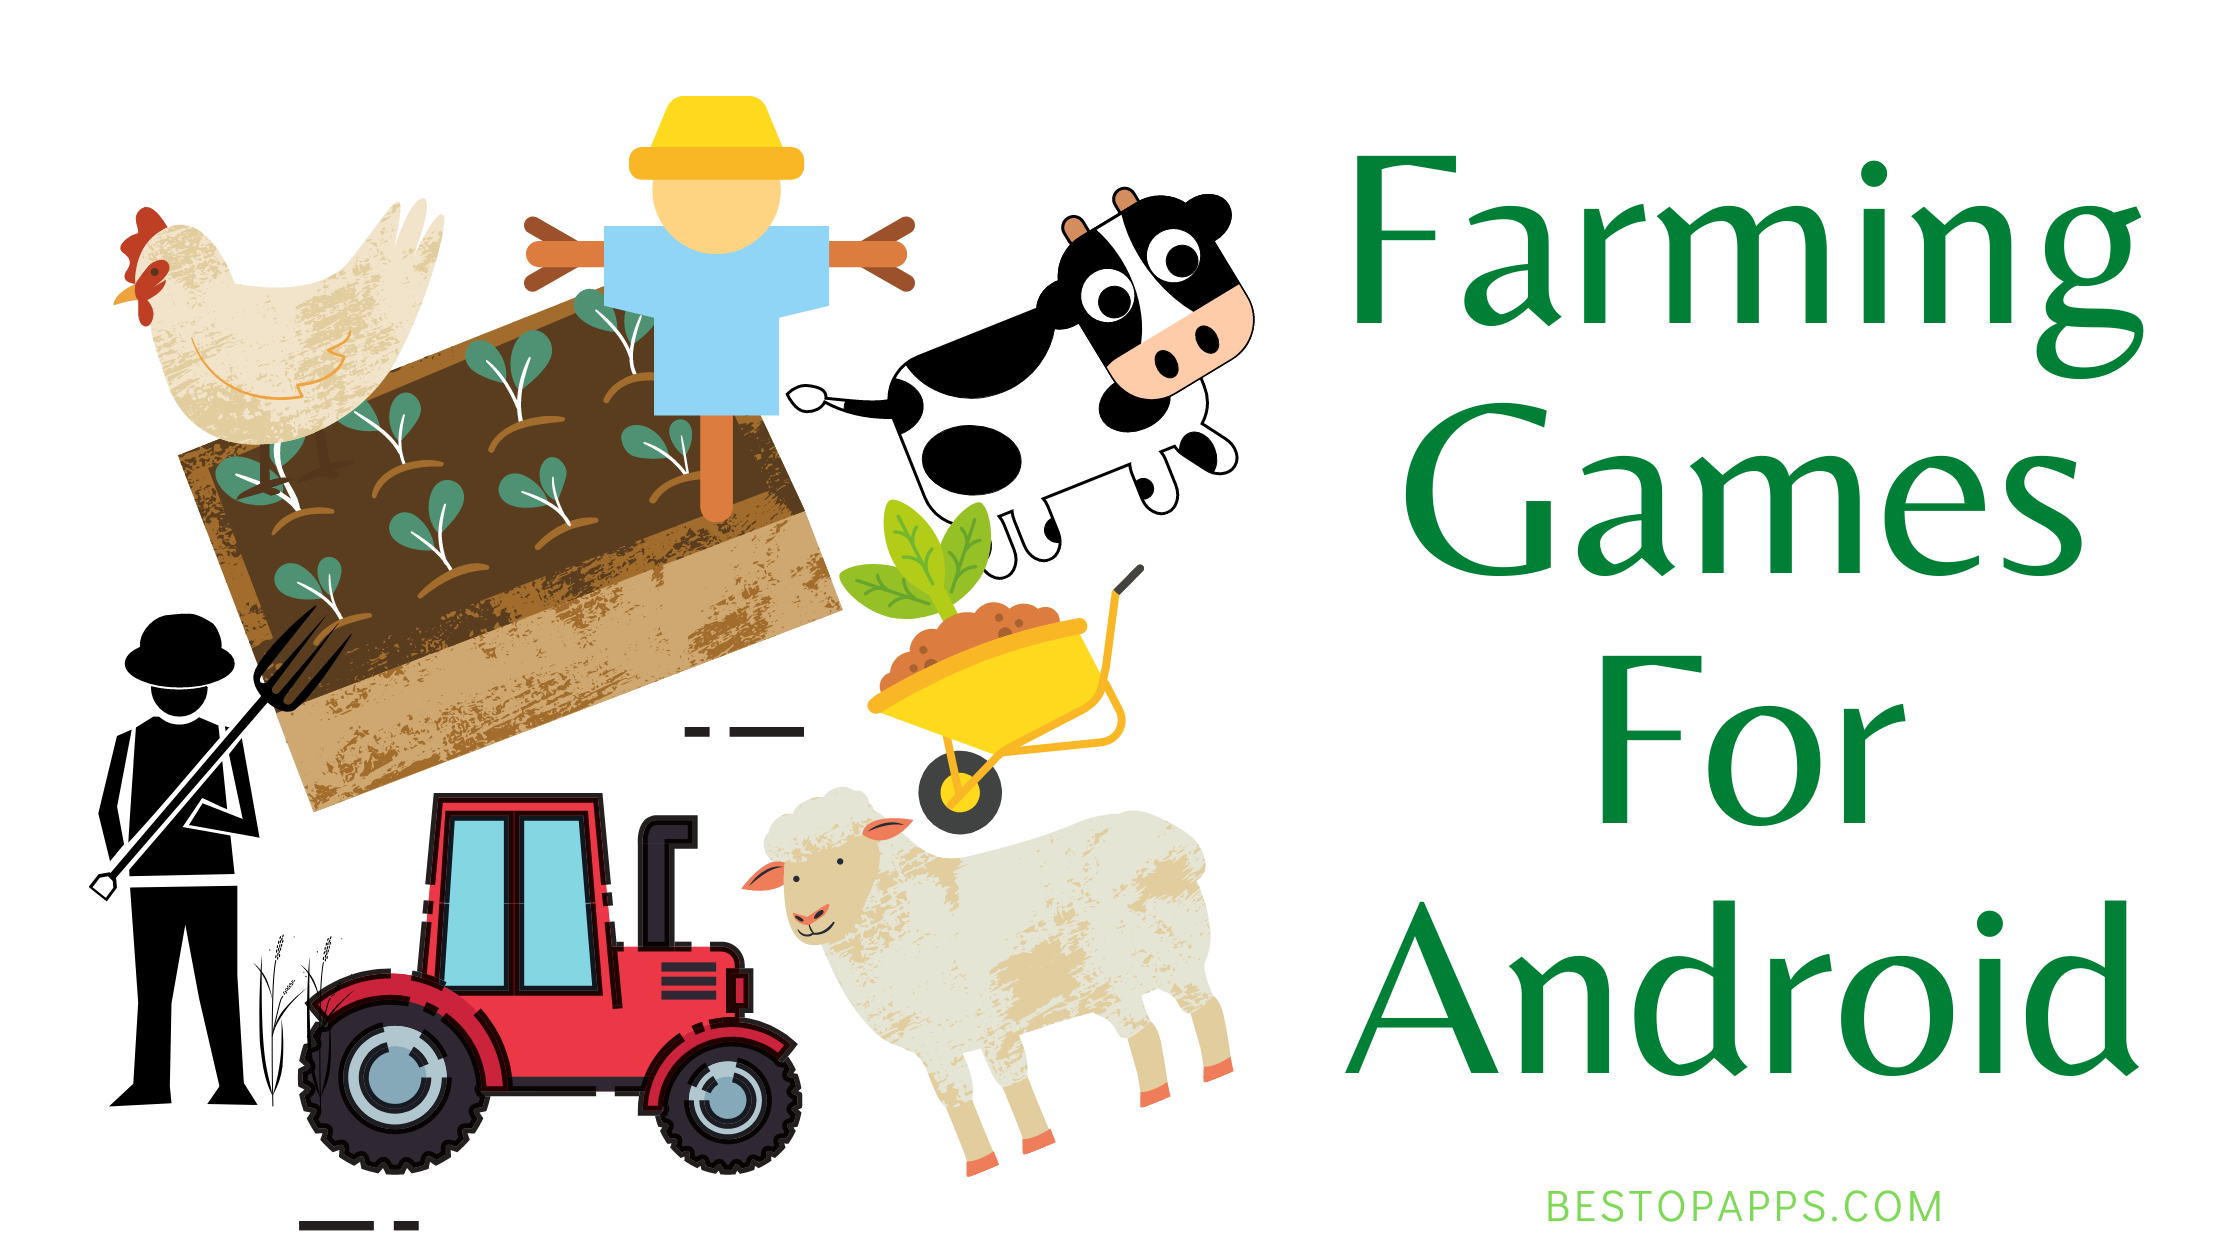 Farming Games For Android